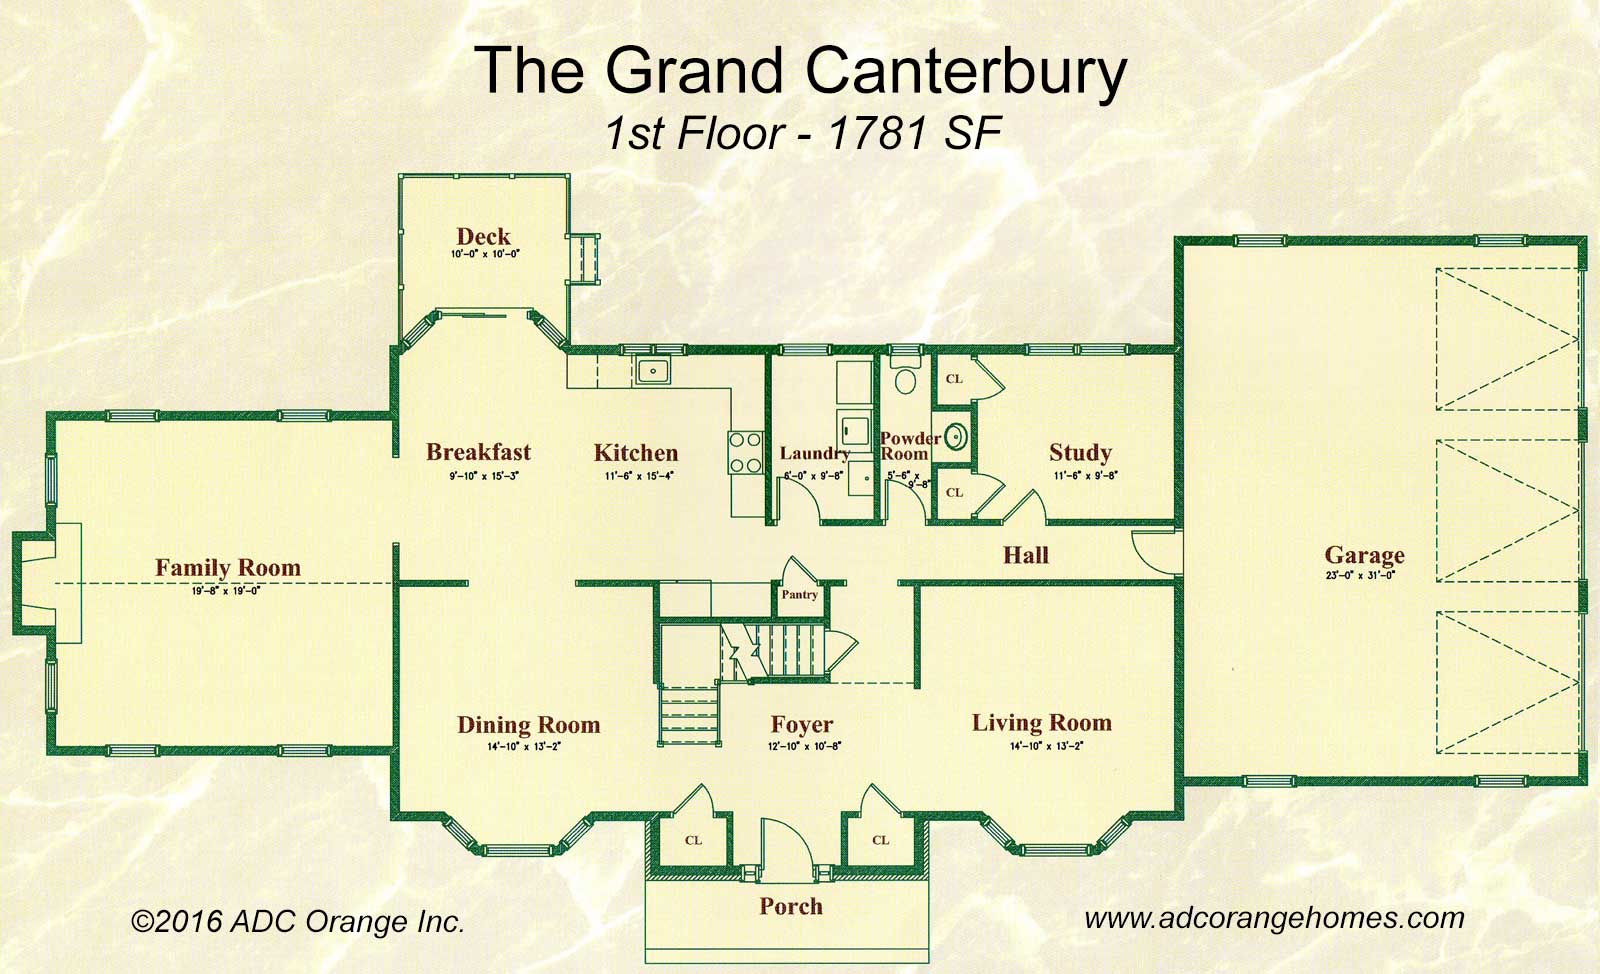 1st Floor Plan for Grand Canterbury - New Home in Orange County, New York